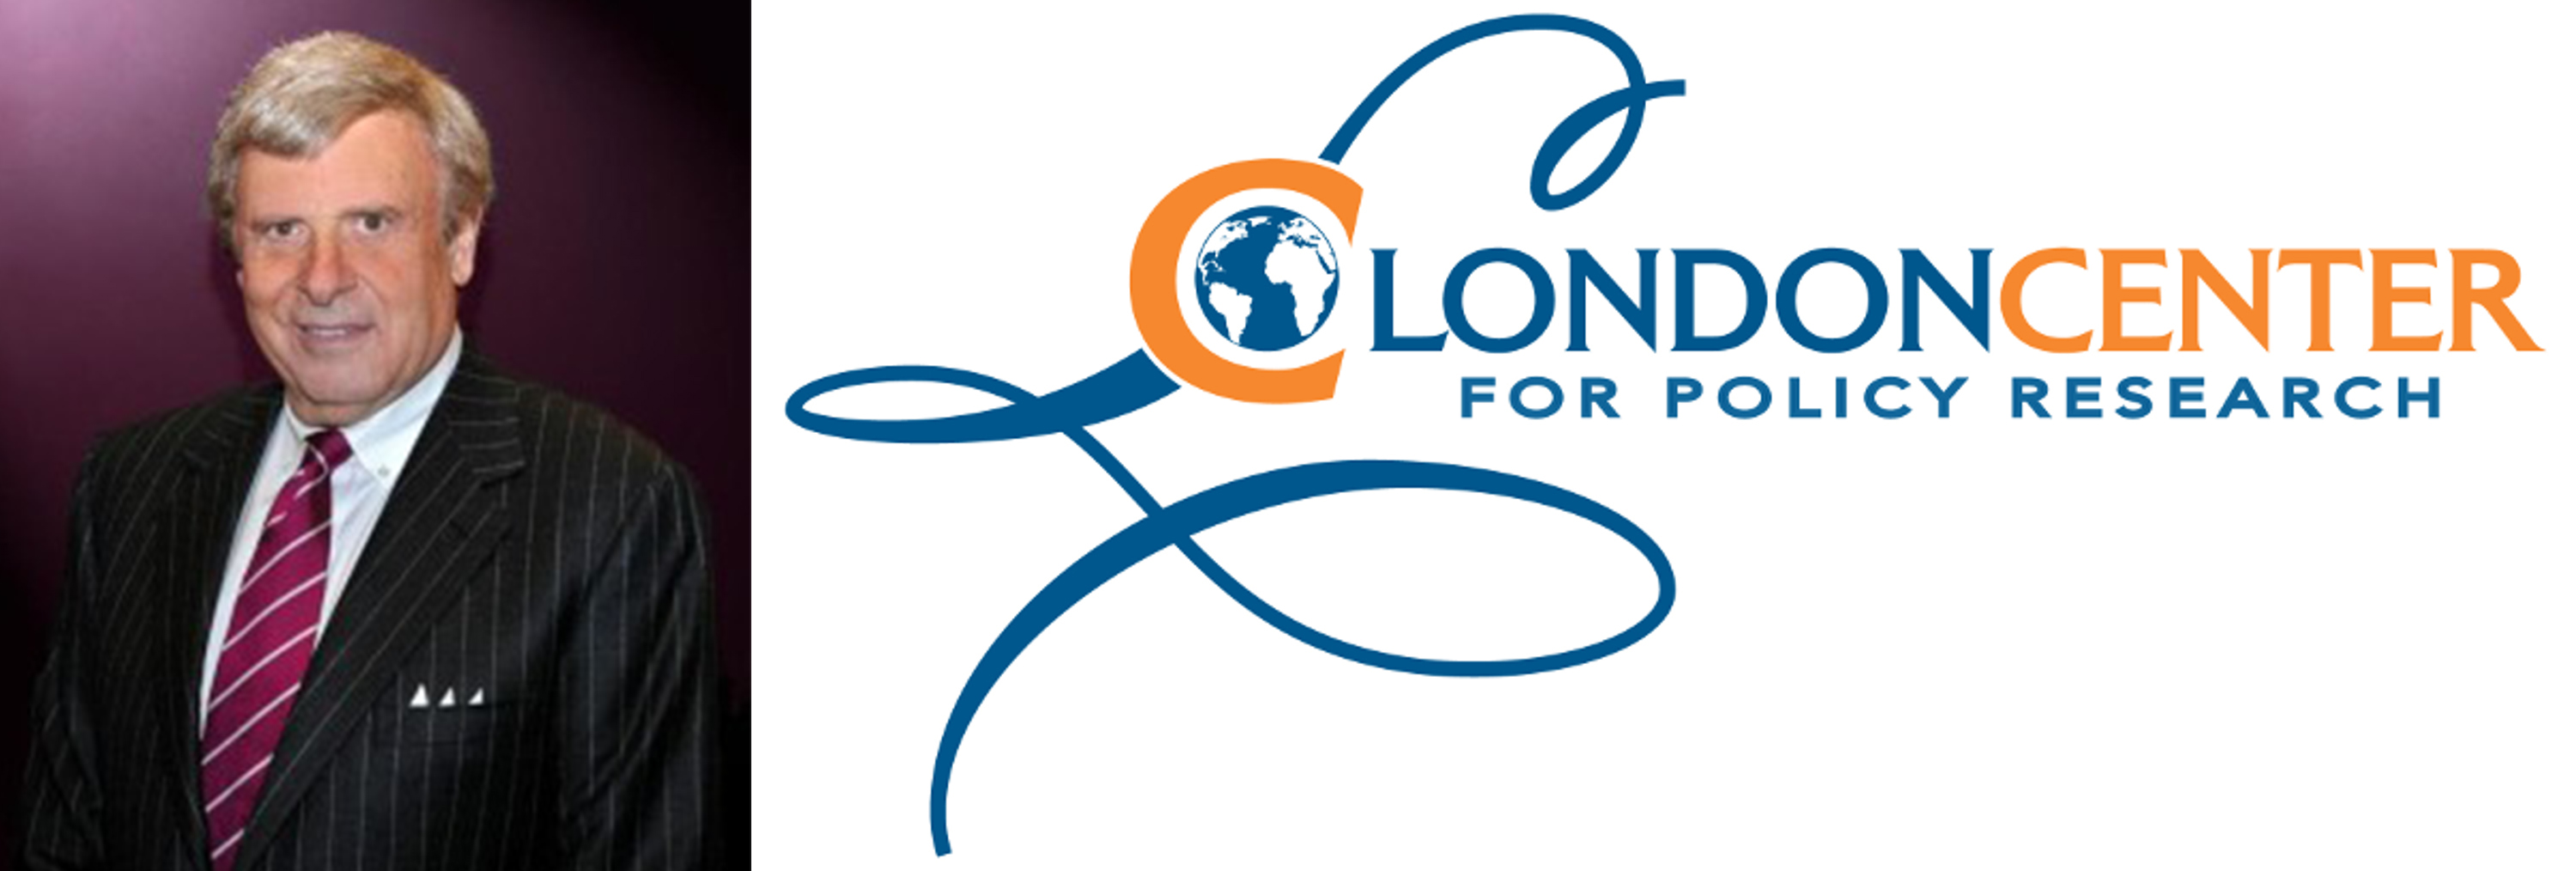 London Center for Policy Research logo